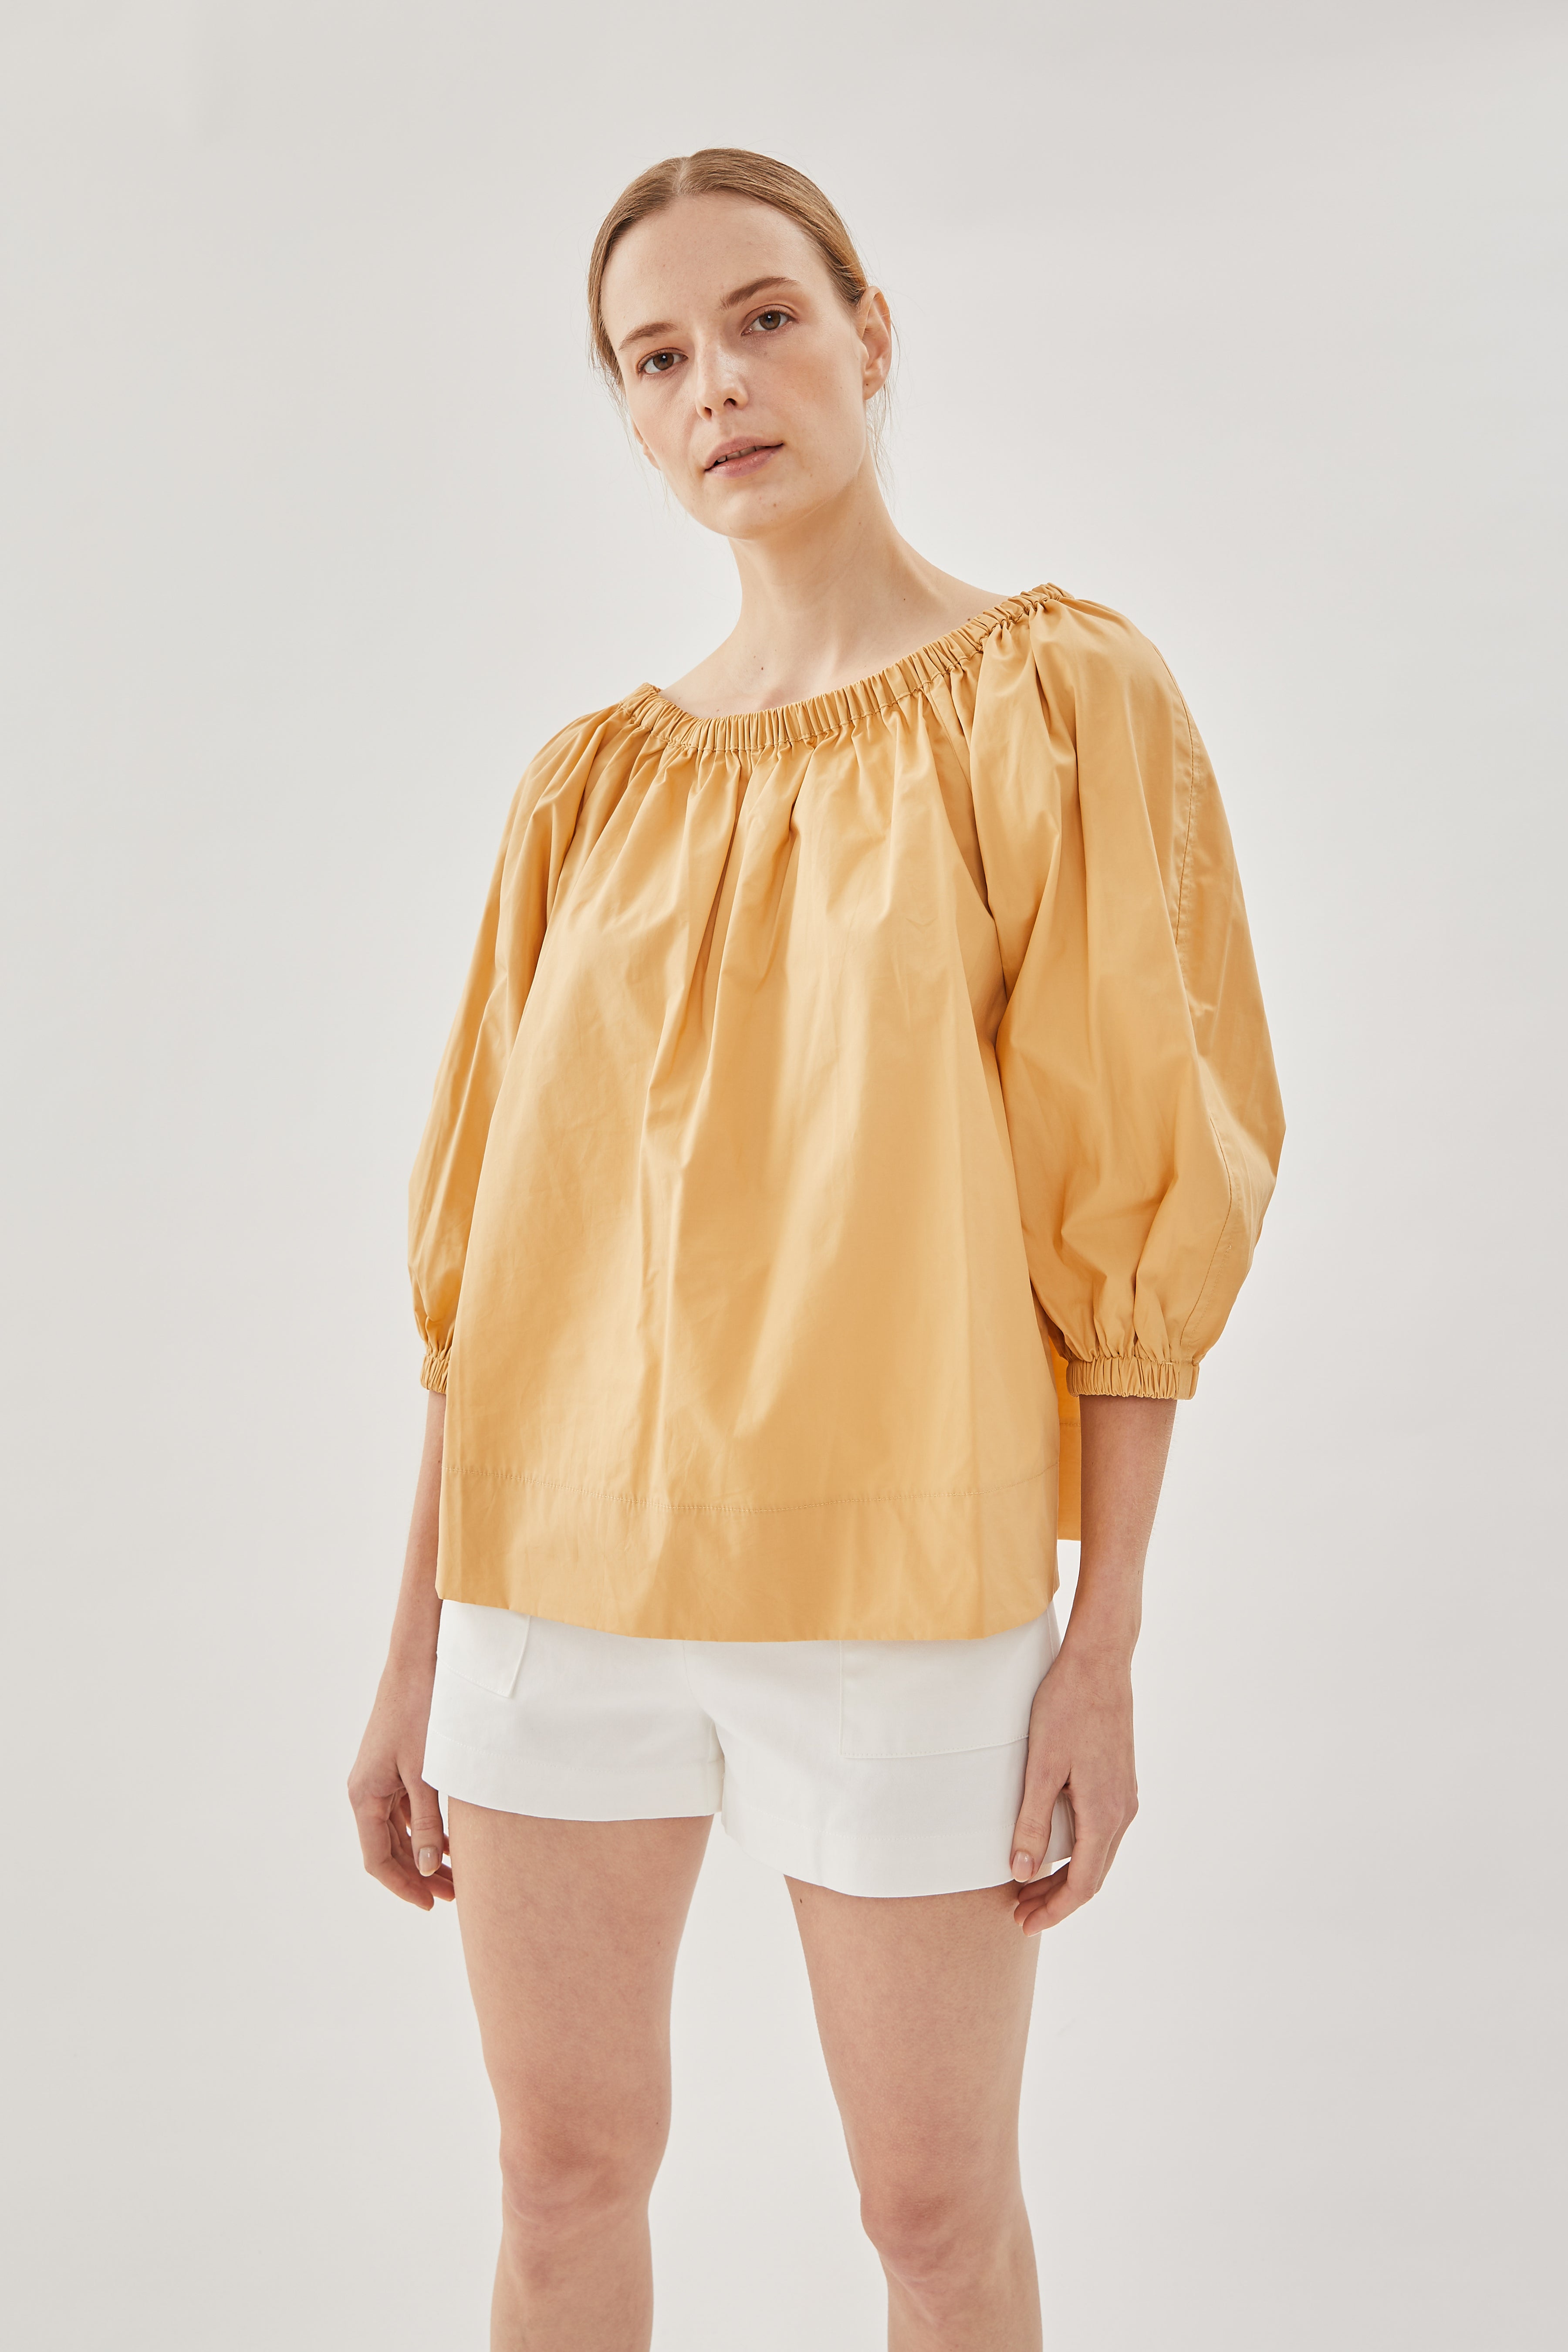 Cotton Gathered Top in Pale Orange